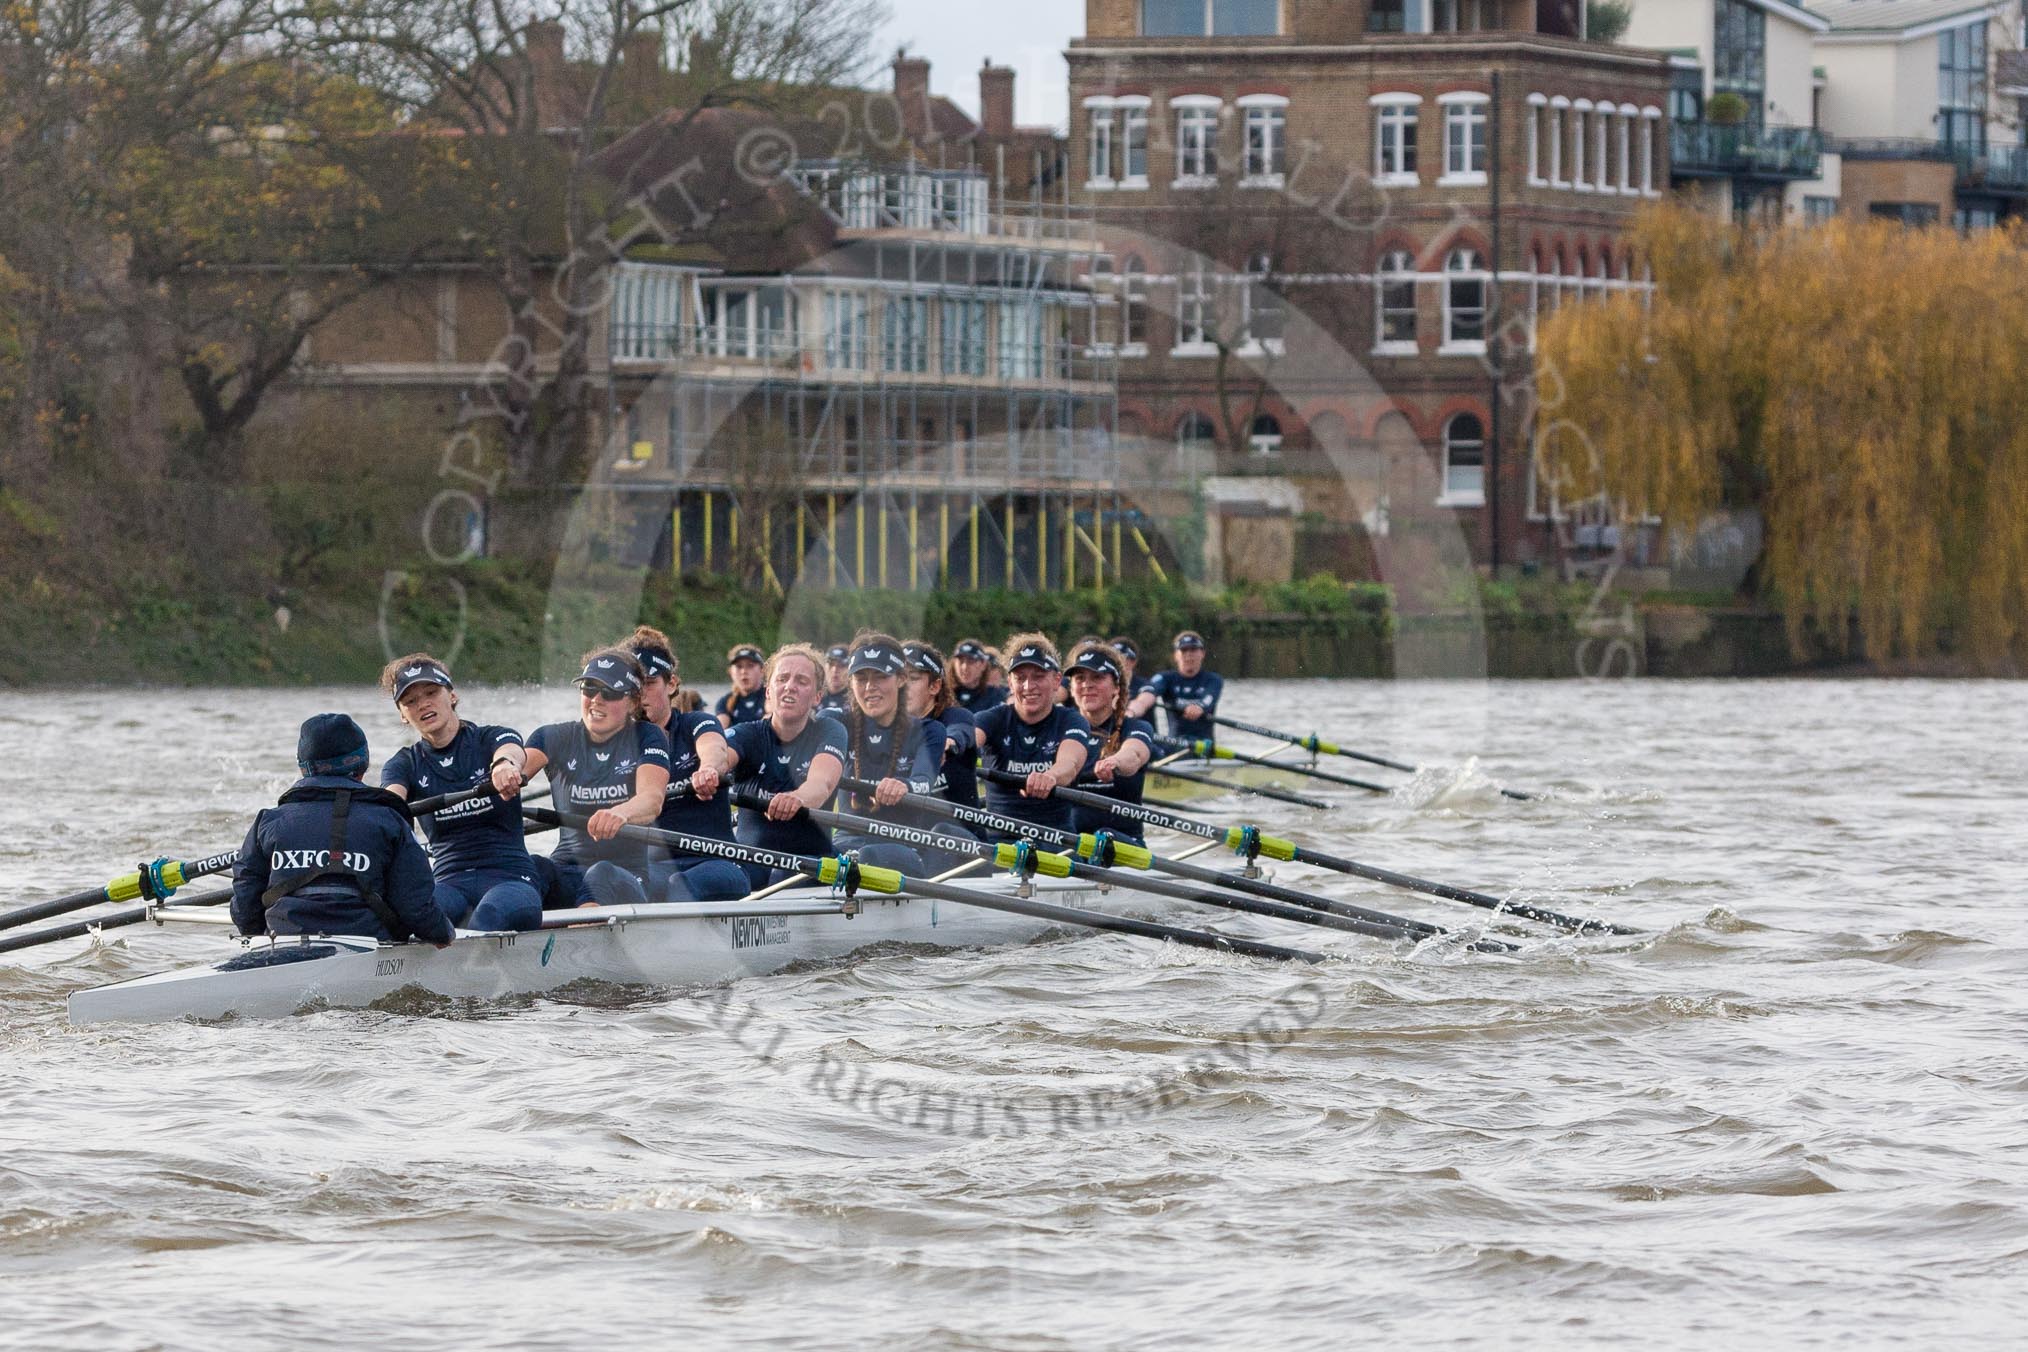 The Boat Race season 2016 - Women's Boat Race Trial Eights (OUWBC, Oxford): "Scylla" and "Charybdis" behind Barnes Railway Bridge, with "Charybdis" in the lead.
River Thames between Putney Bridge and Mortlake,
London SW15,

United Kingdom,
on 10 December 2015 at 12:35, image #303